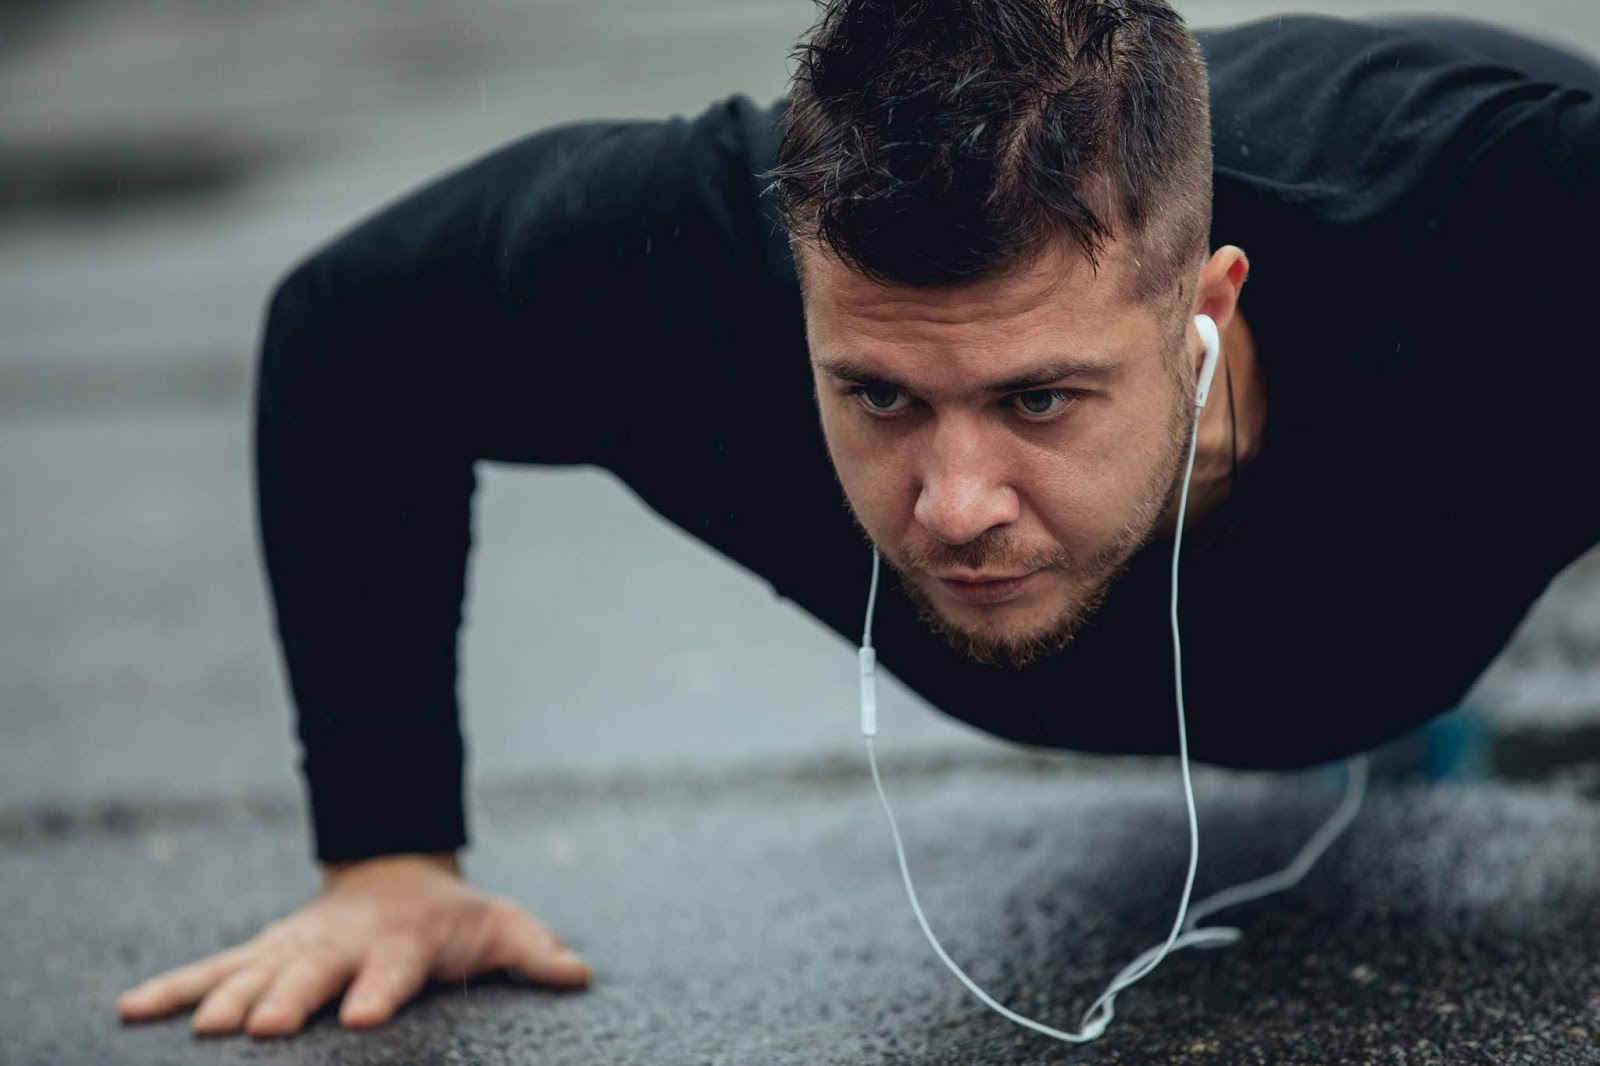 Men Who Can’t Do Ten Push-Ups Are At Greater Risk Of Heart Disease, According To Scientists